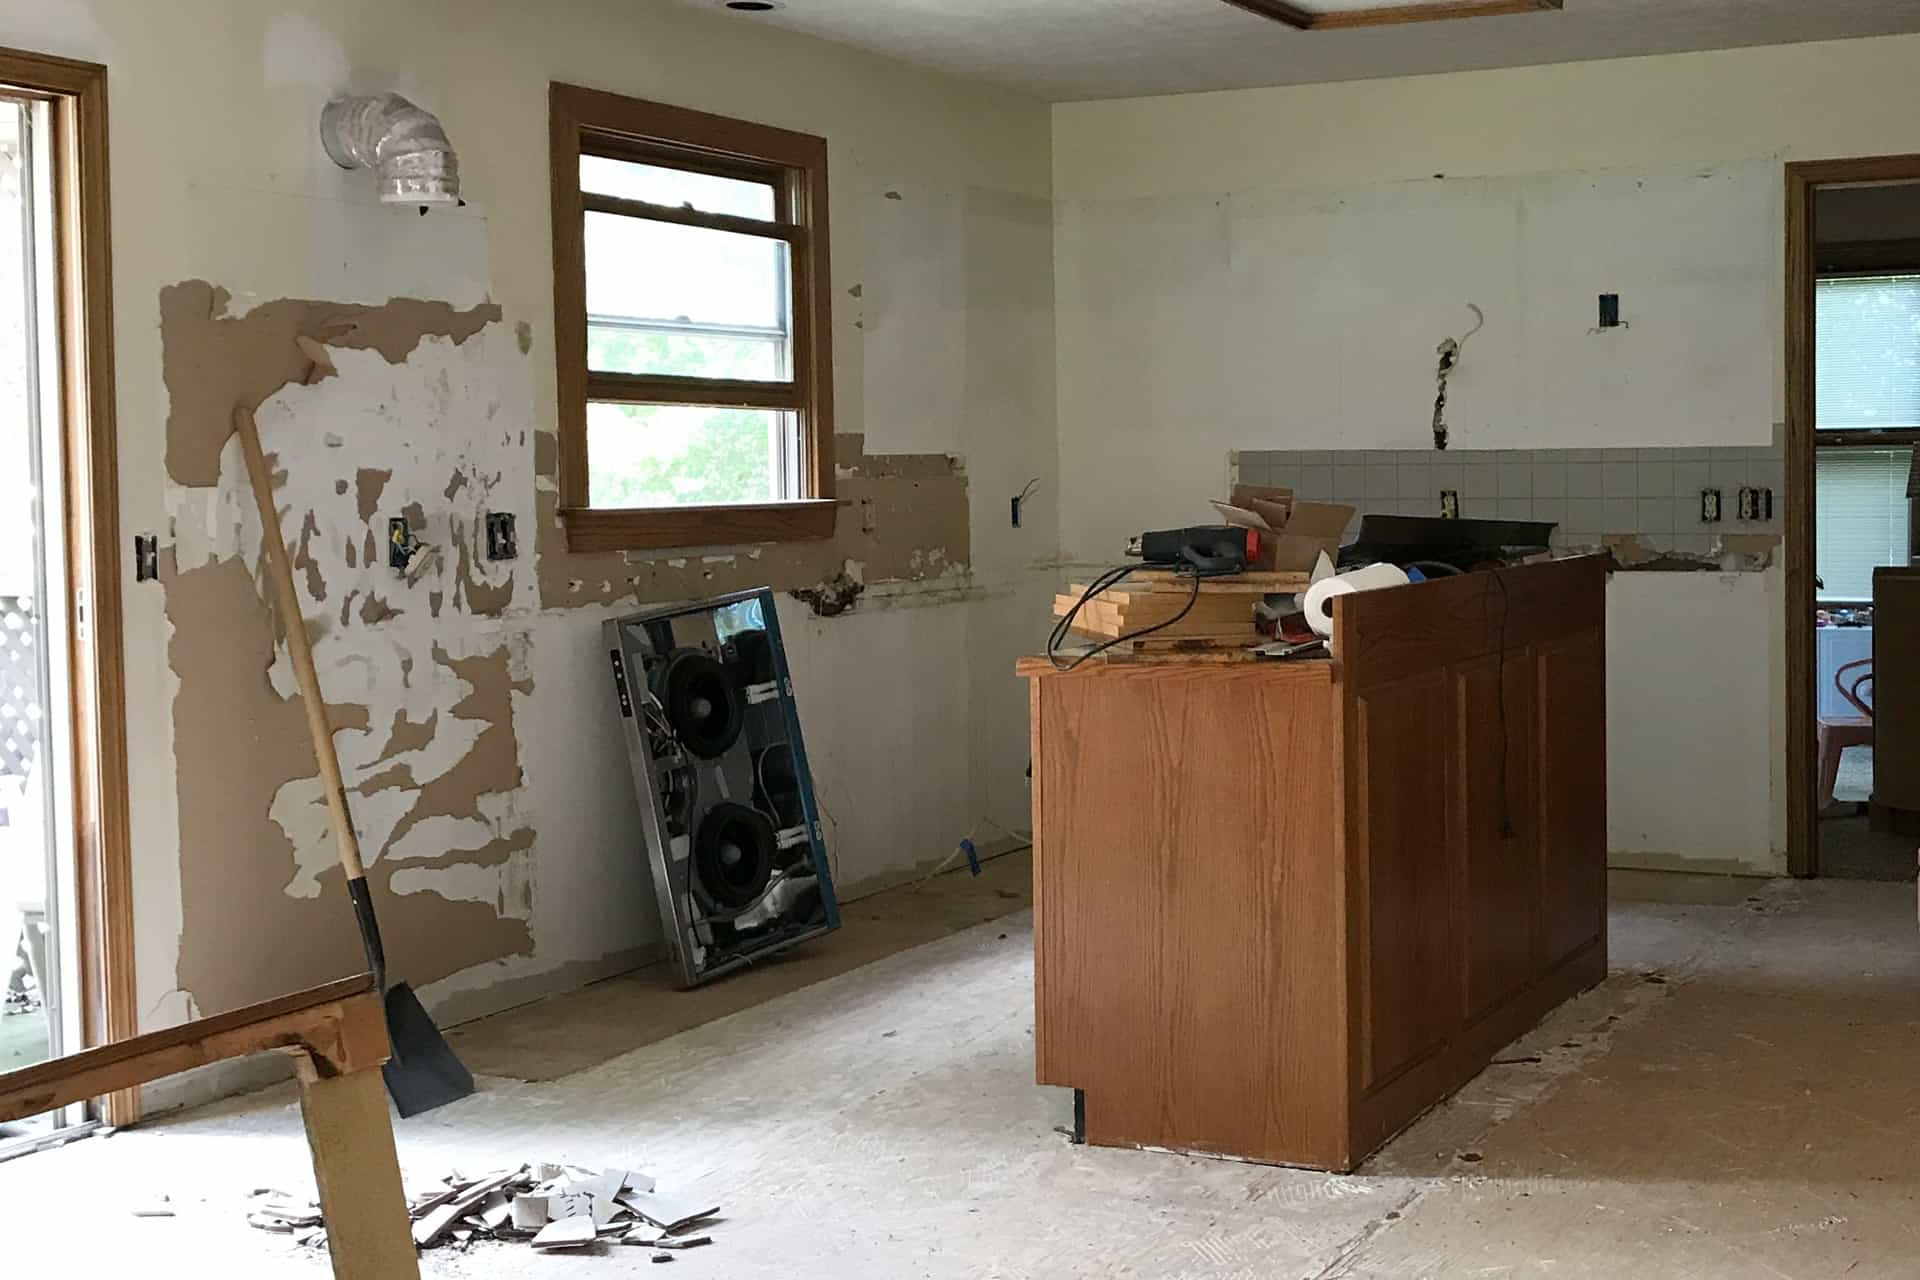 kitchen being renovated with cabinets torn out